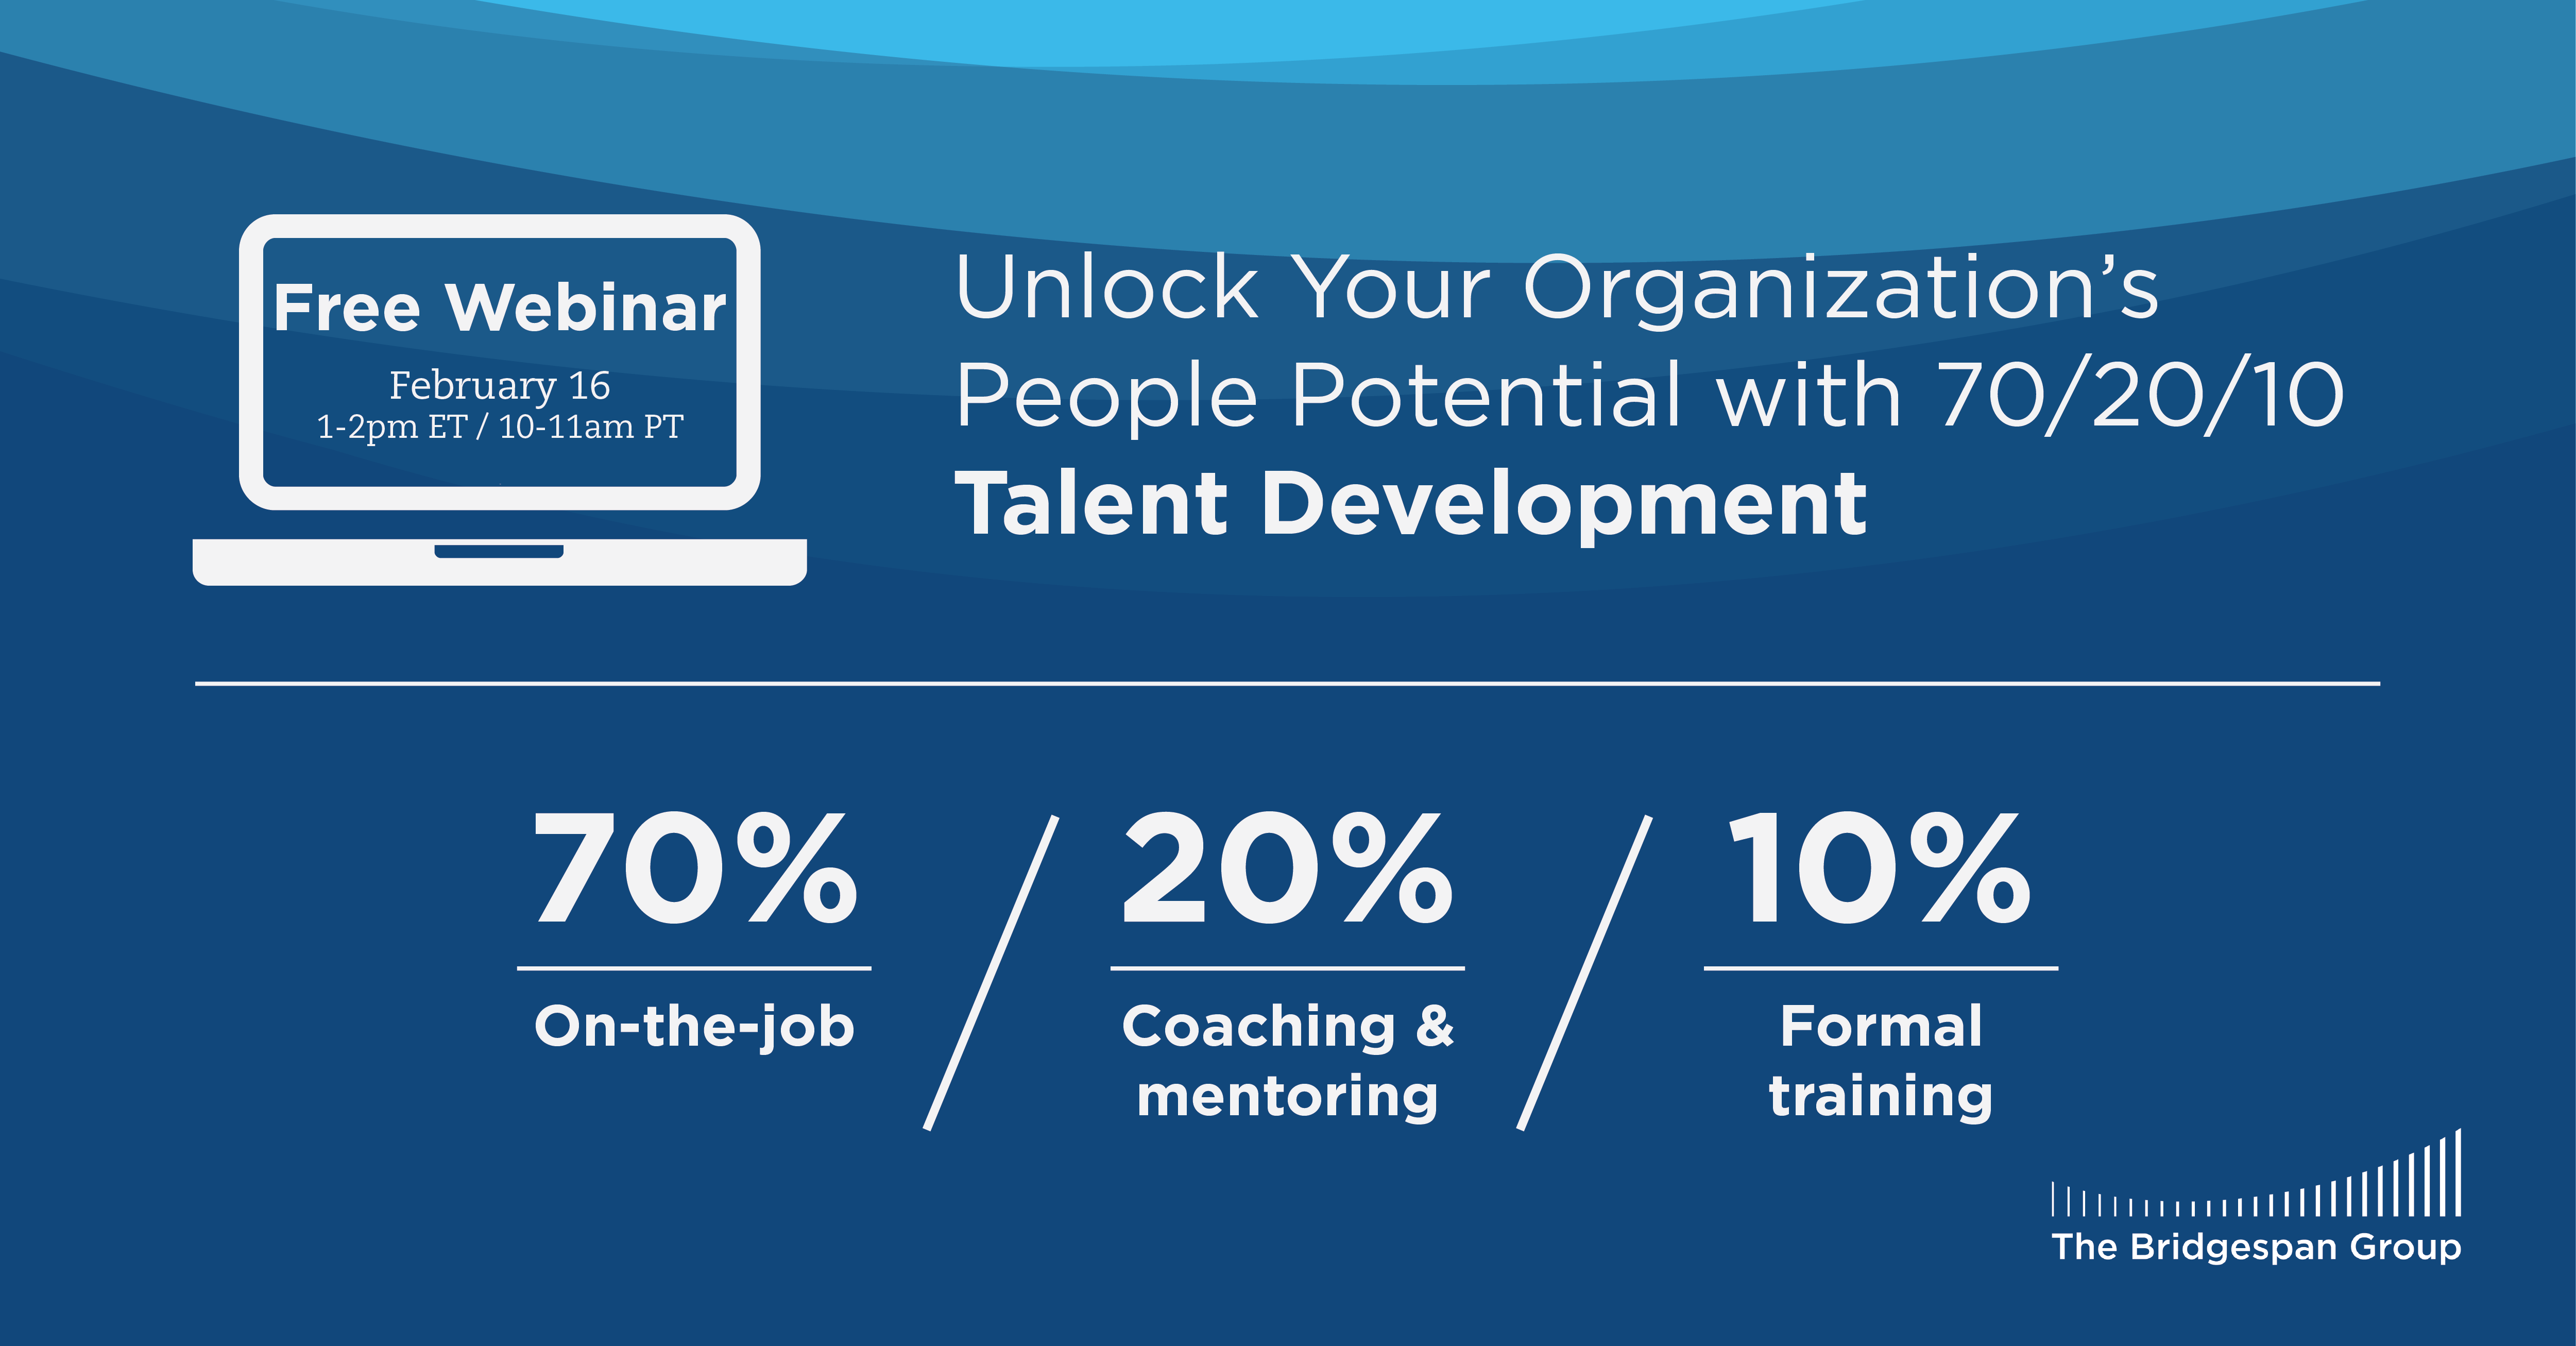  Unlock Your Organization’s People Potential with 70/20/10 Talent Development<br /><br />February 16, 2022<br />1 - 2pm ET / 10 - 11am PT Image